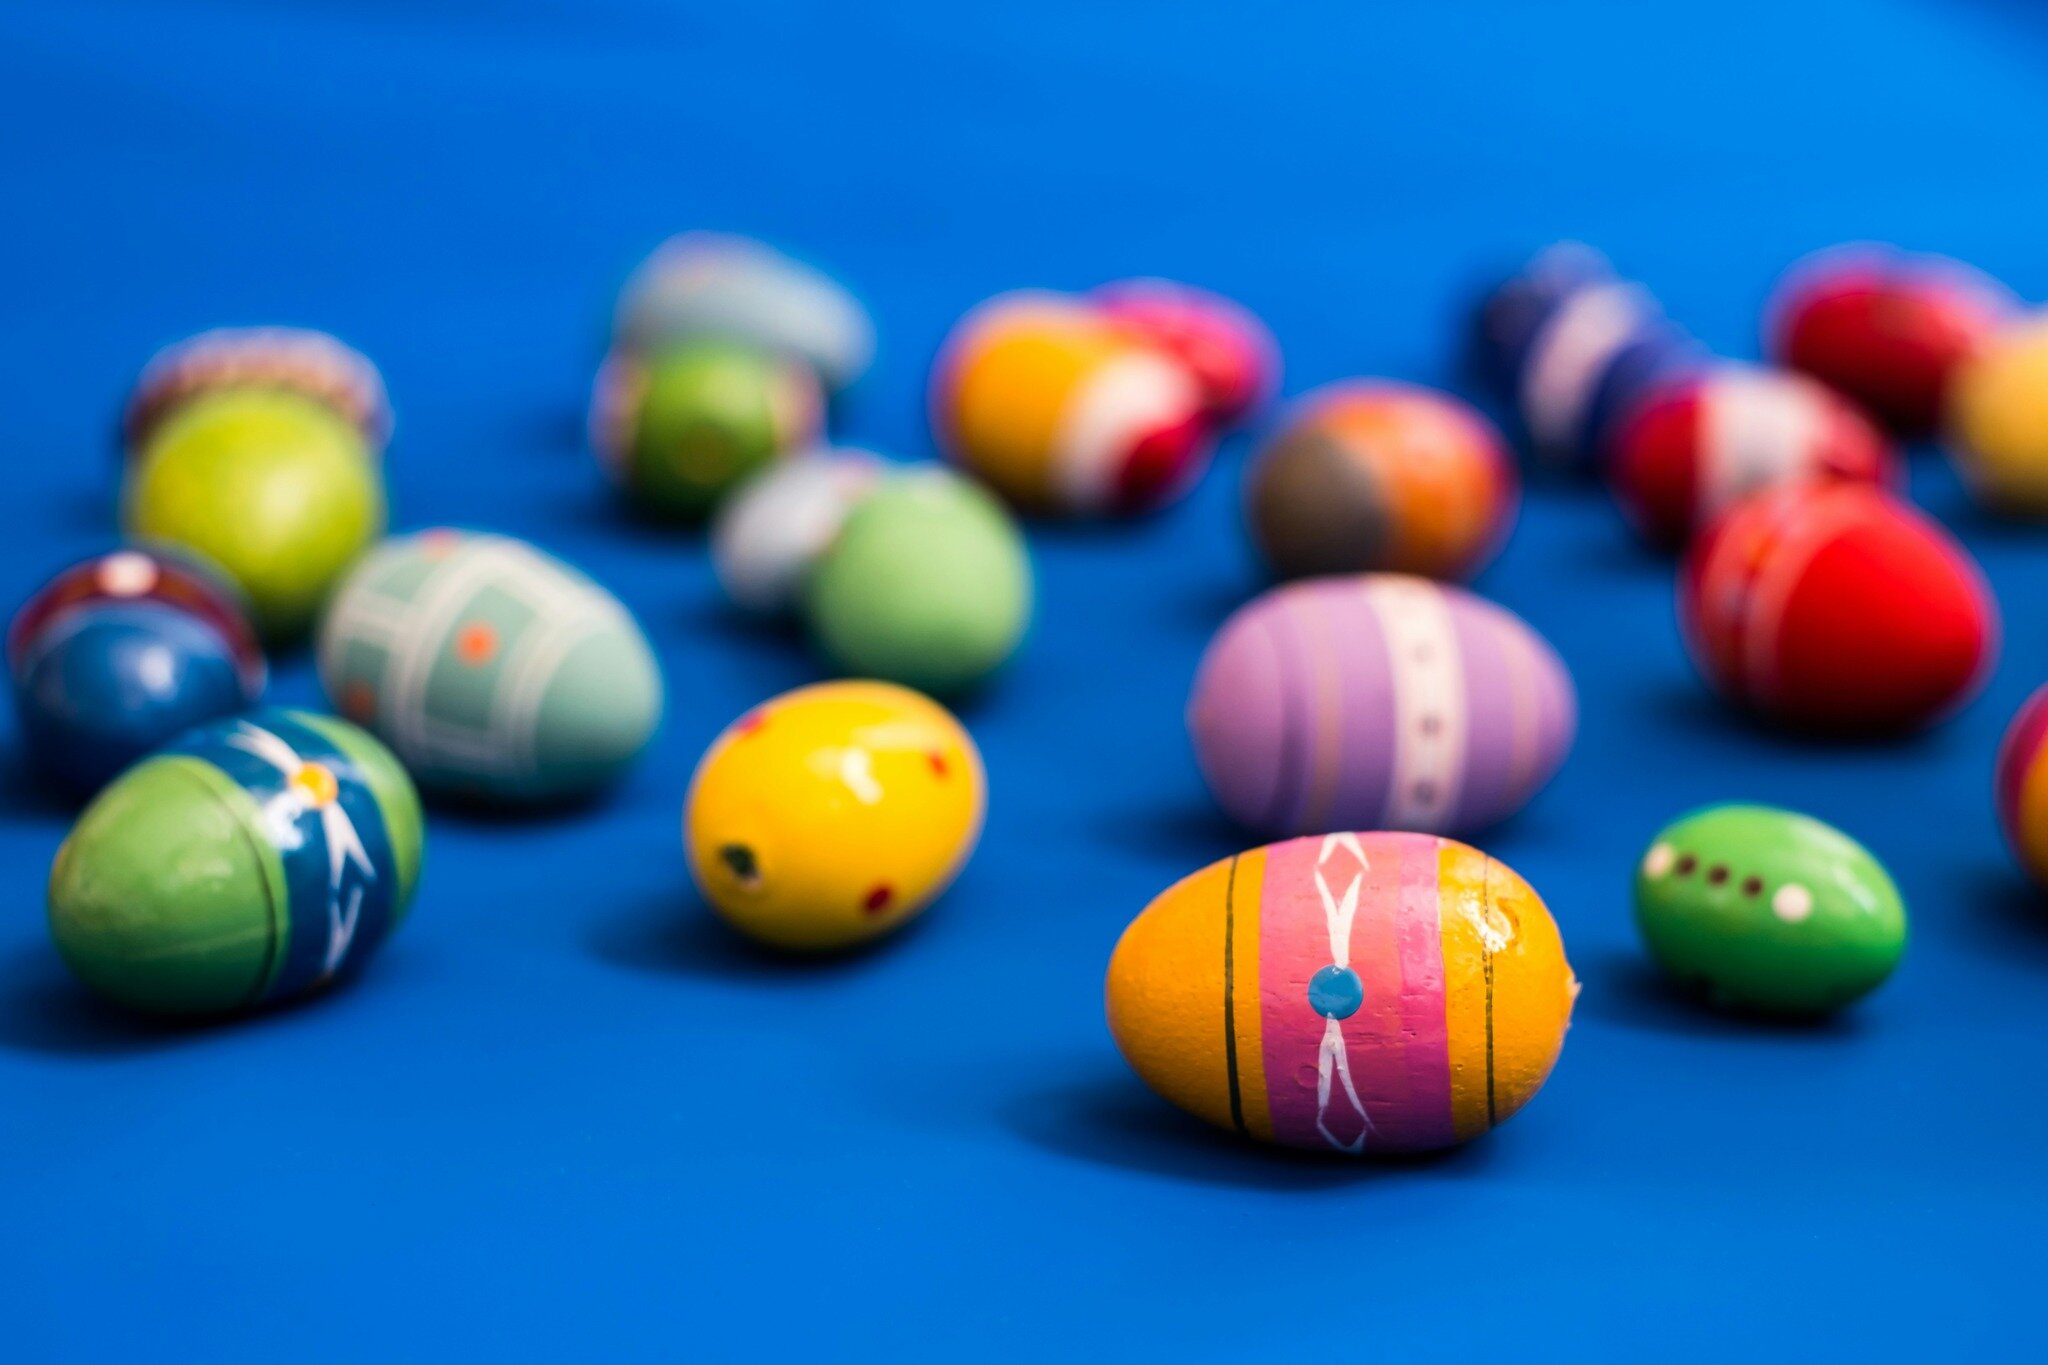 Not long left now to get your Easter gift from us!

Click the link to read more!

https://www.buildmyconfidence.net/management

#managementdevelopment #leadershipdevelopment #leadershiptraining #managerdevelopment #growyourown #leadershipskills #mana